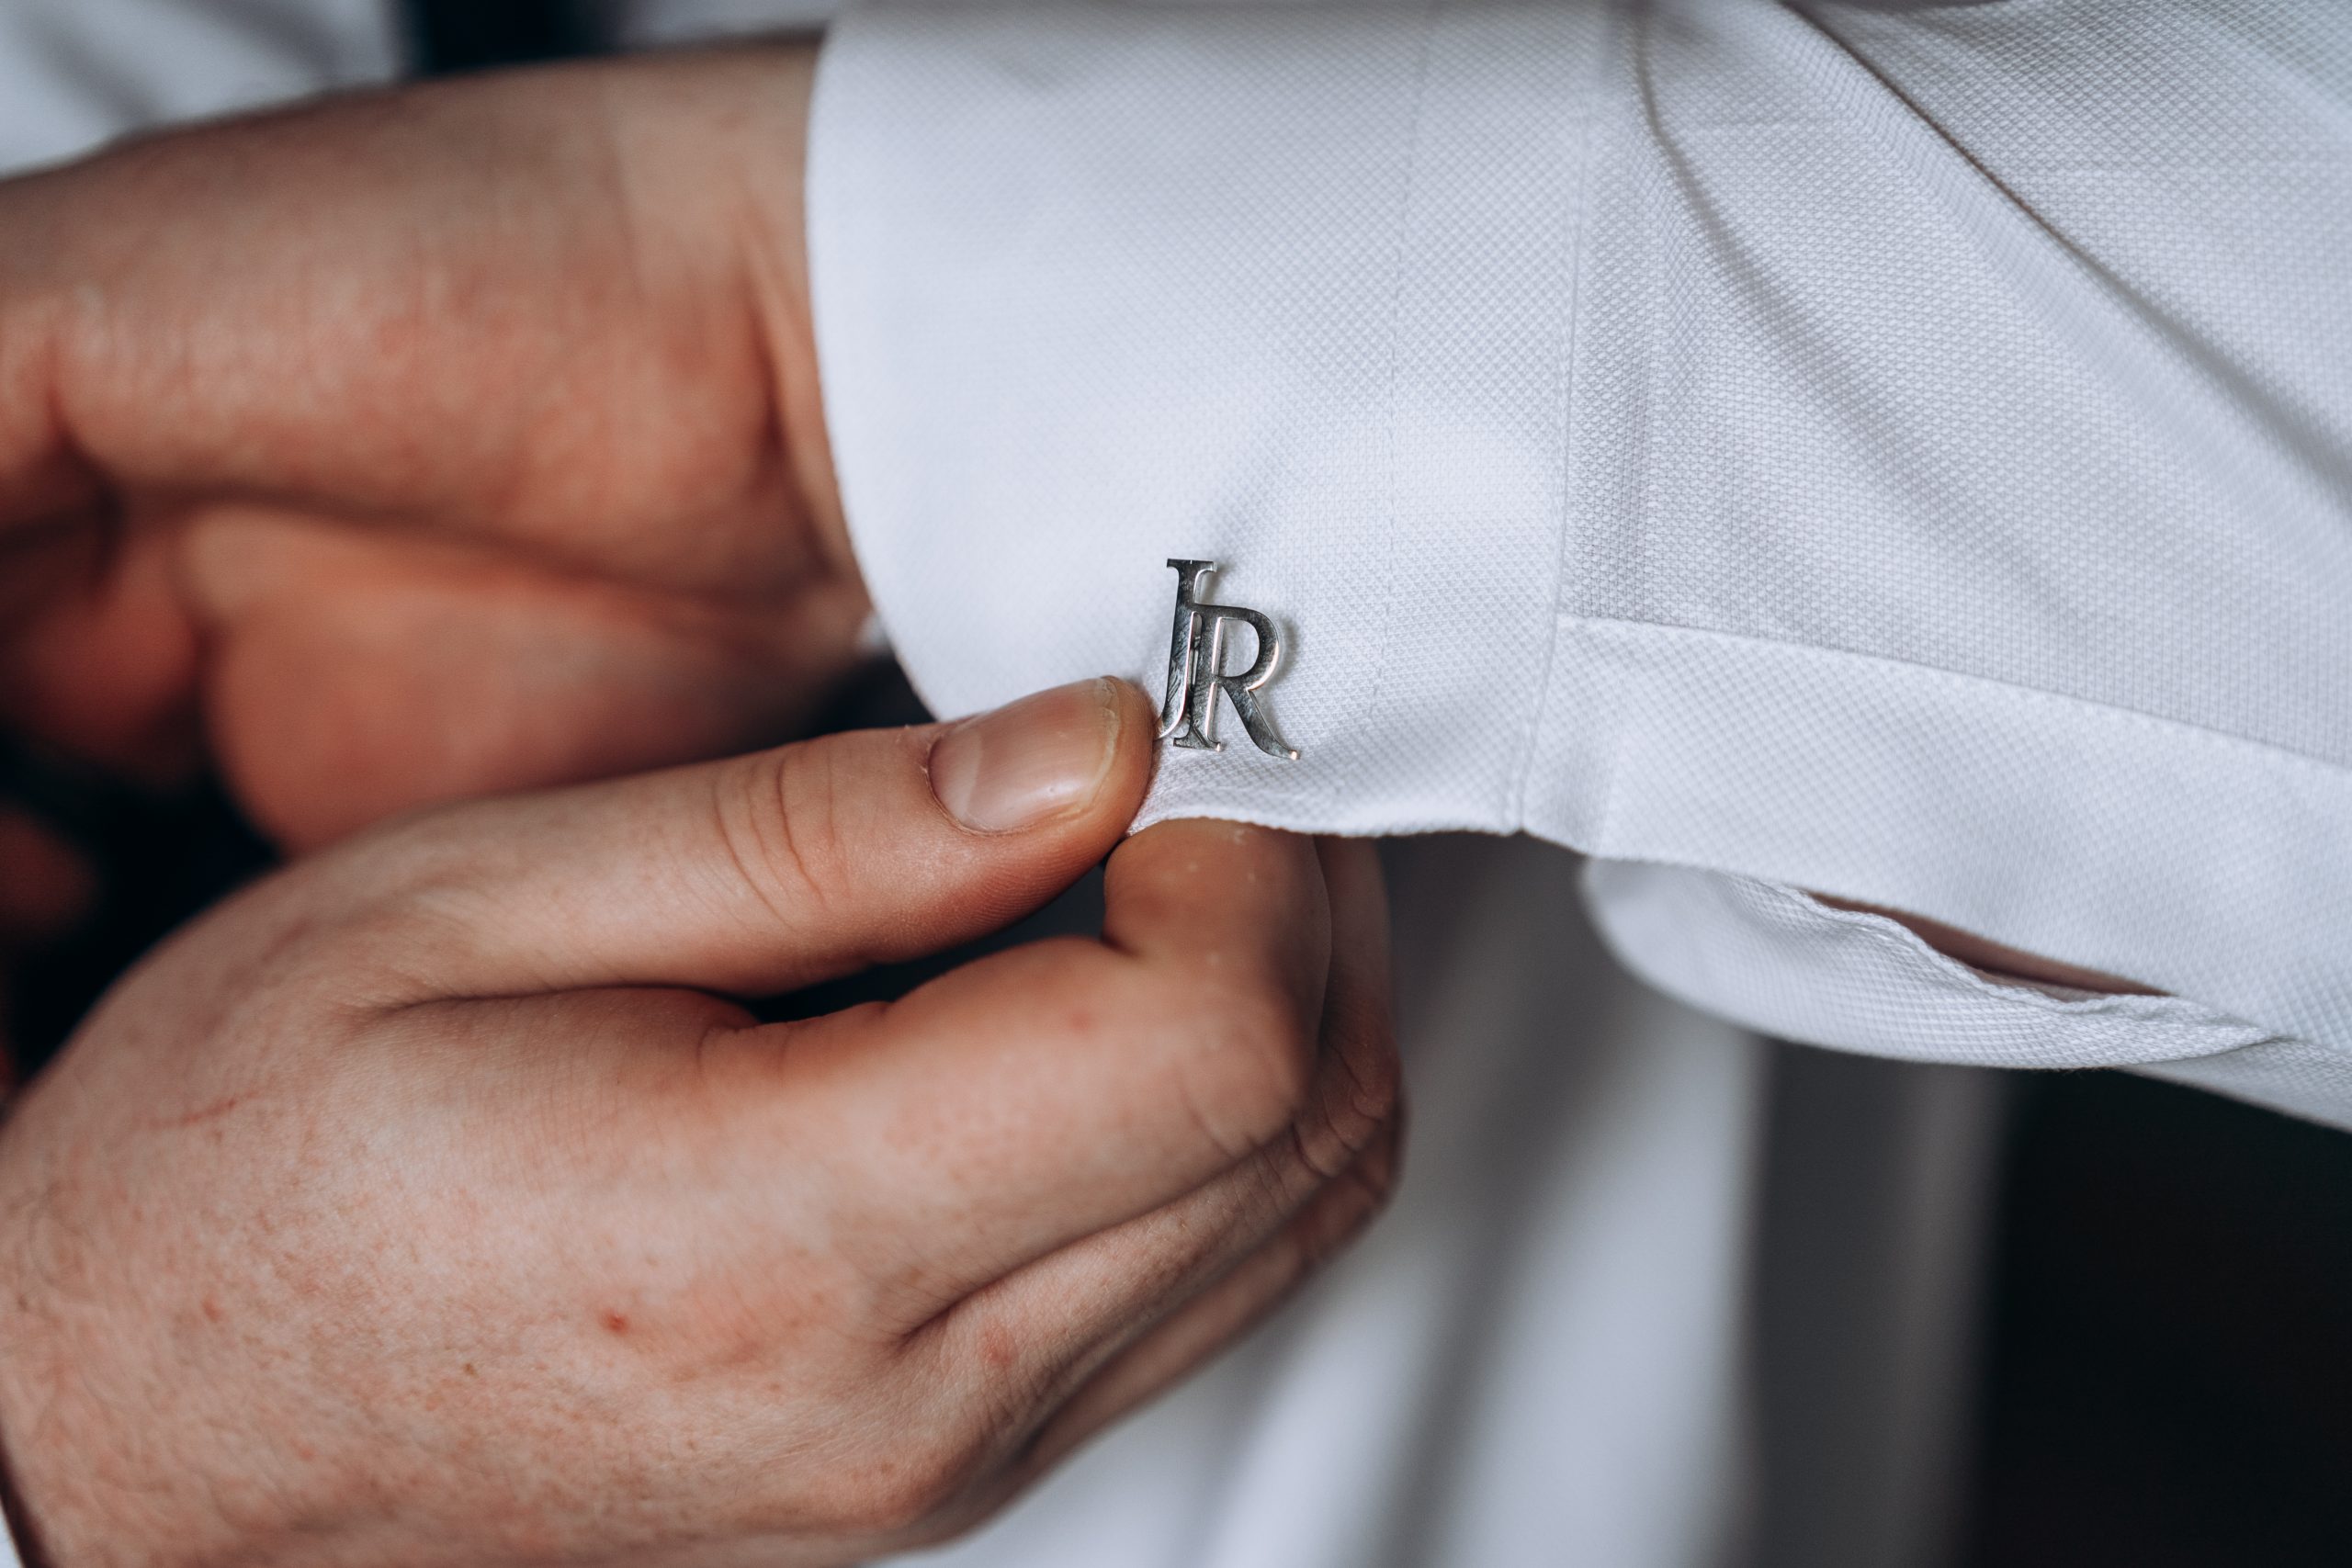 detail image of grooms cufflink as her prepares for his wedding day